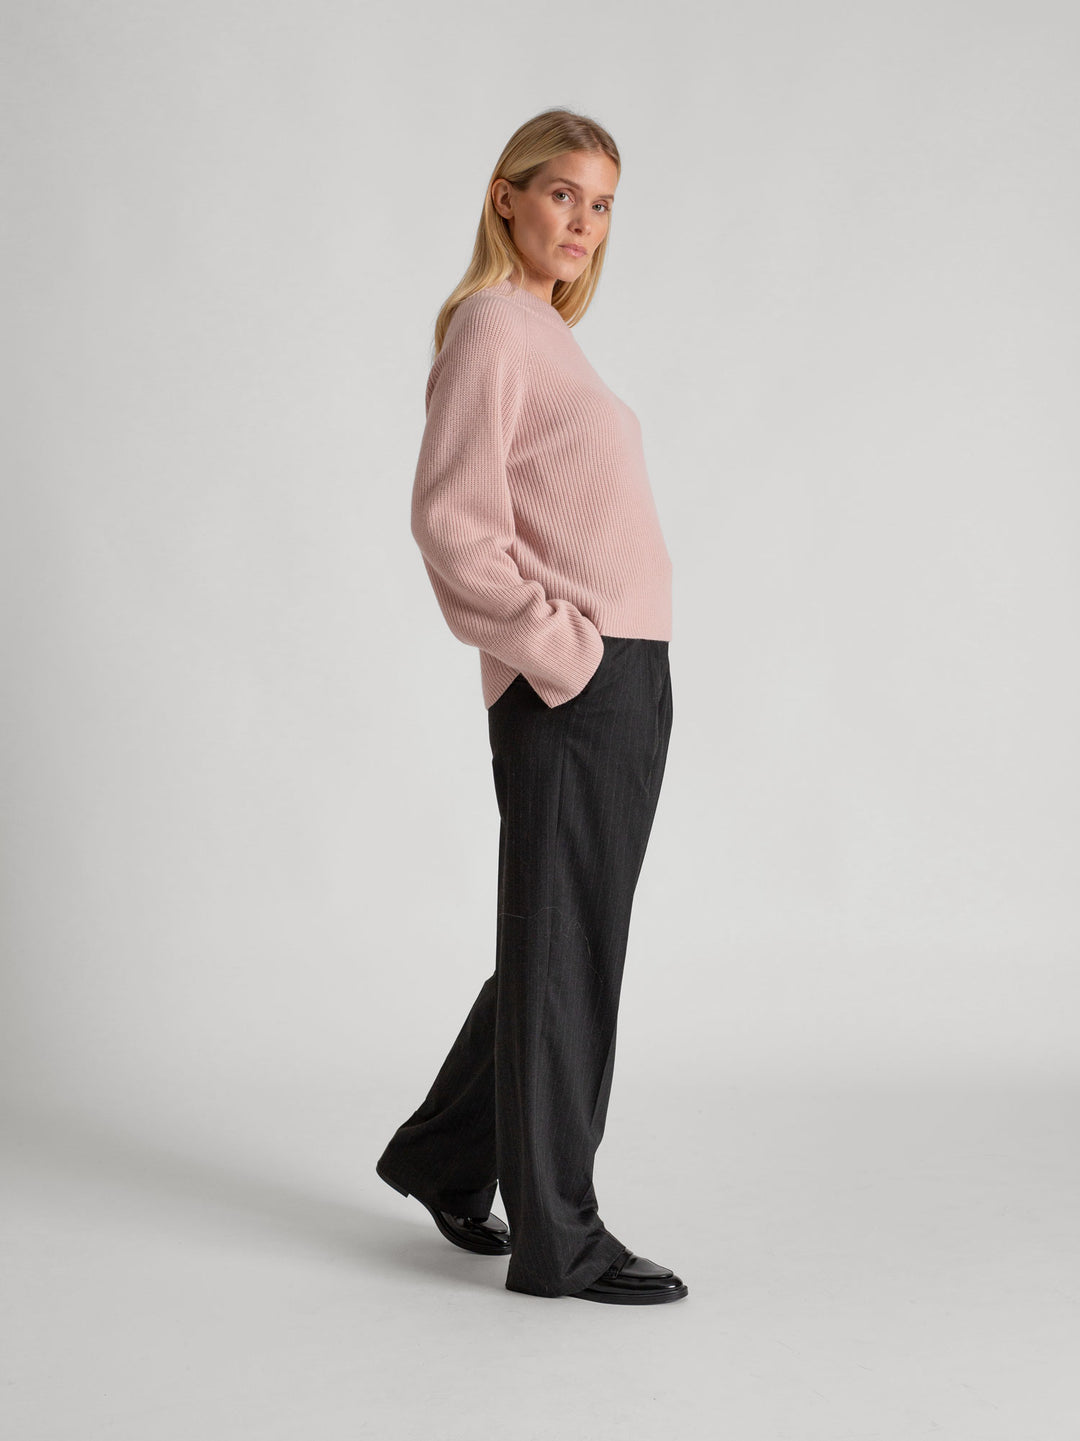 Rib knitted cashmere sweater "Idun" in 100% pure cashmere. Scandinavian design by Kashmina. Color: Rose Glow.